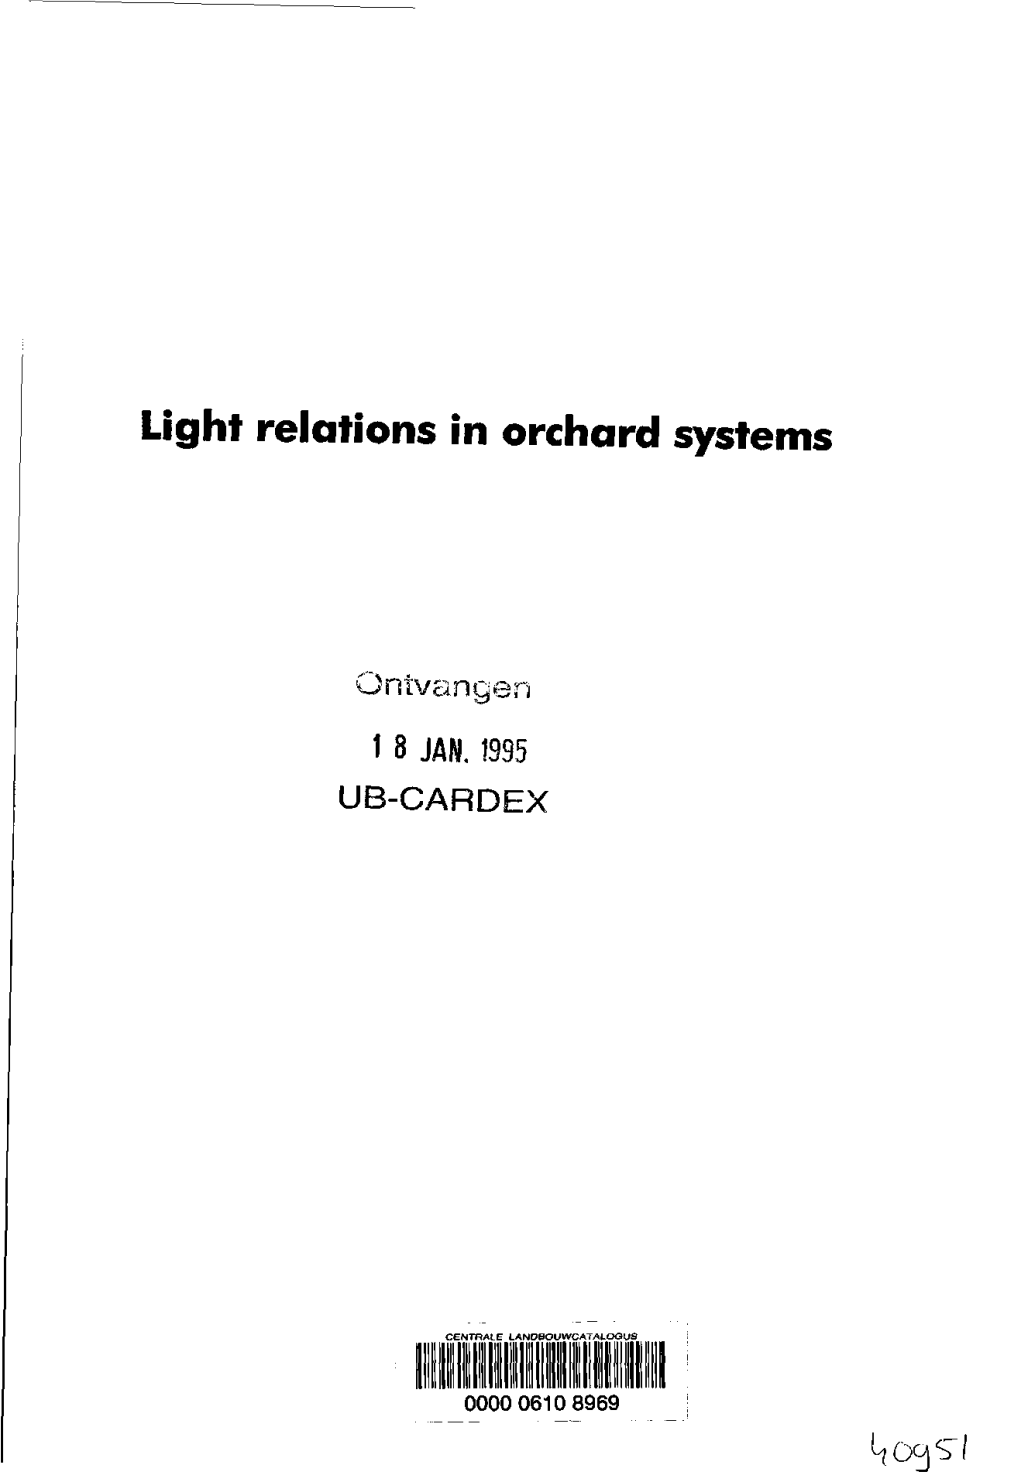 Light Relations in Orchard Systems